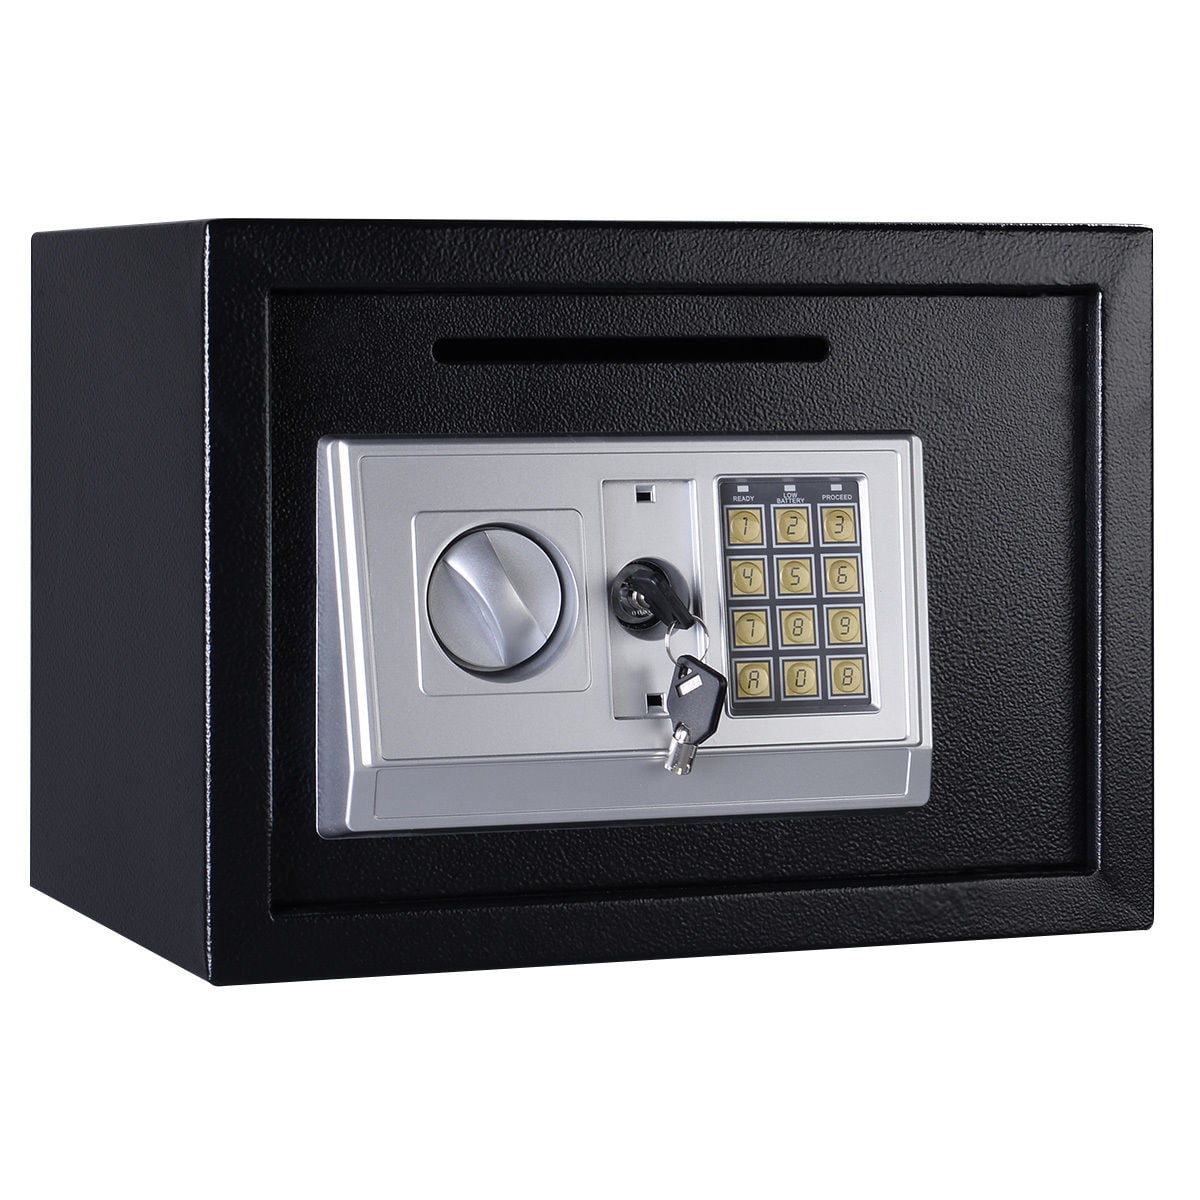 KCT SMALL HOME DIGITAL SAFE SECURE SAFETY BOX HIGH SECURITY OFFICE  ELECTRONIC 